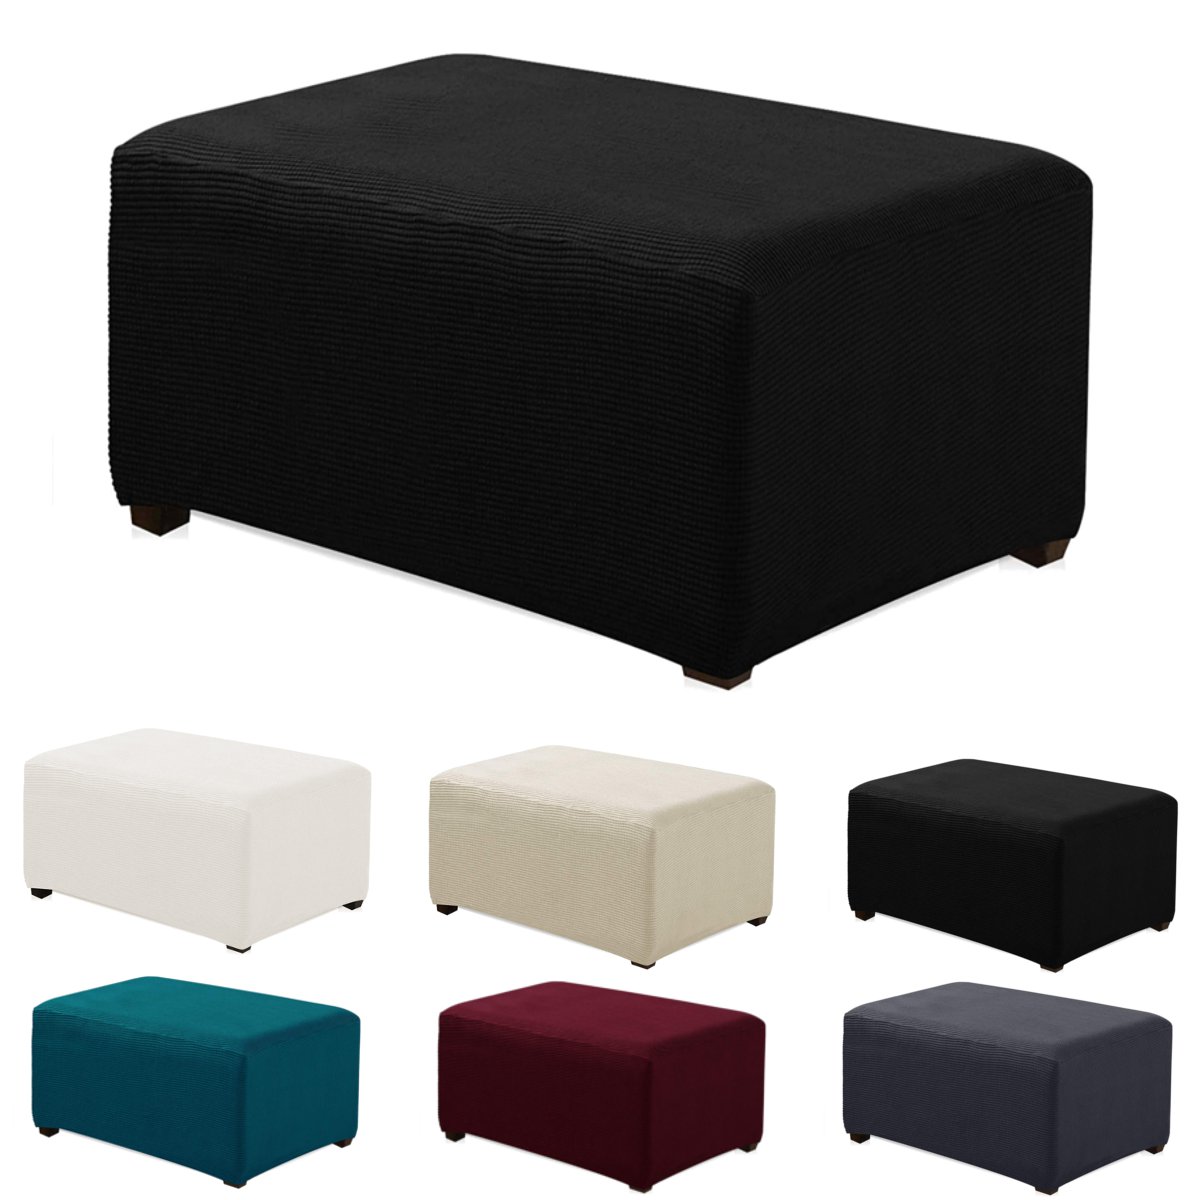 Stretchy Fabric Footstool Cover Square Ottoman Protector Stretch Slipcover for Home Sofa 15